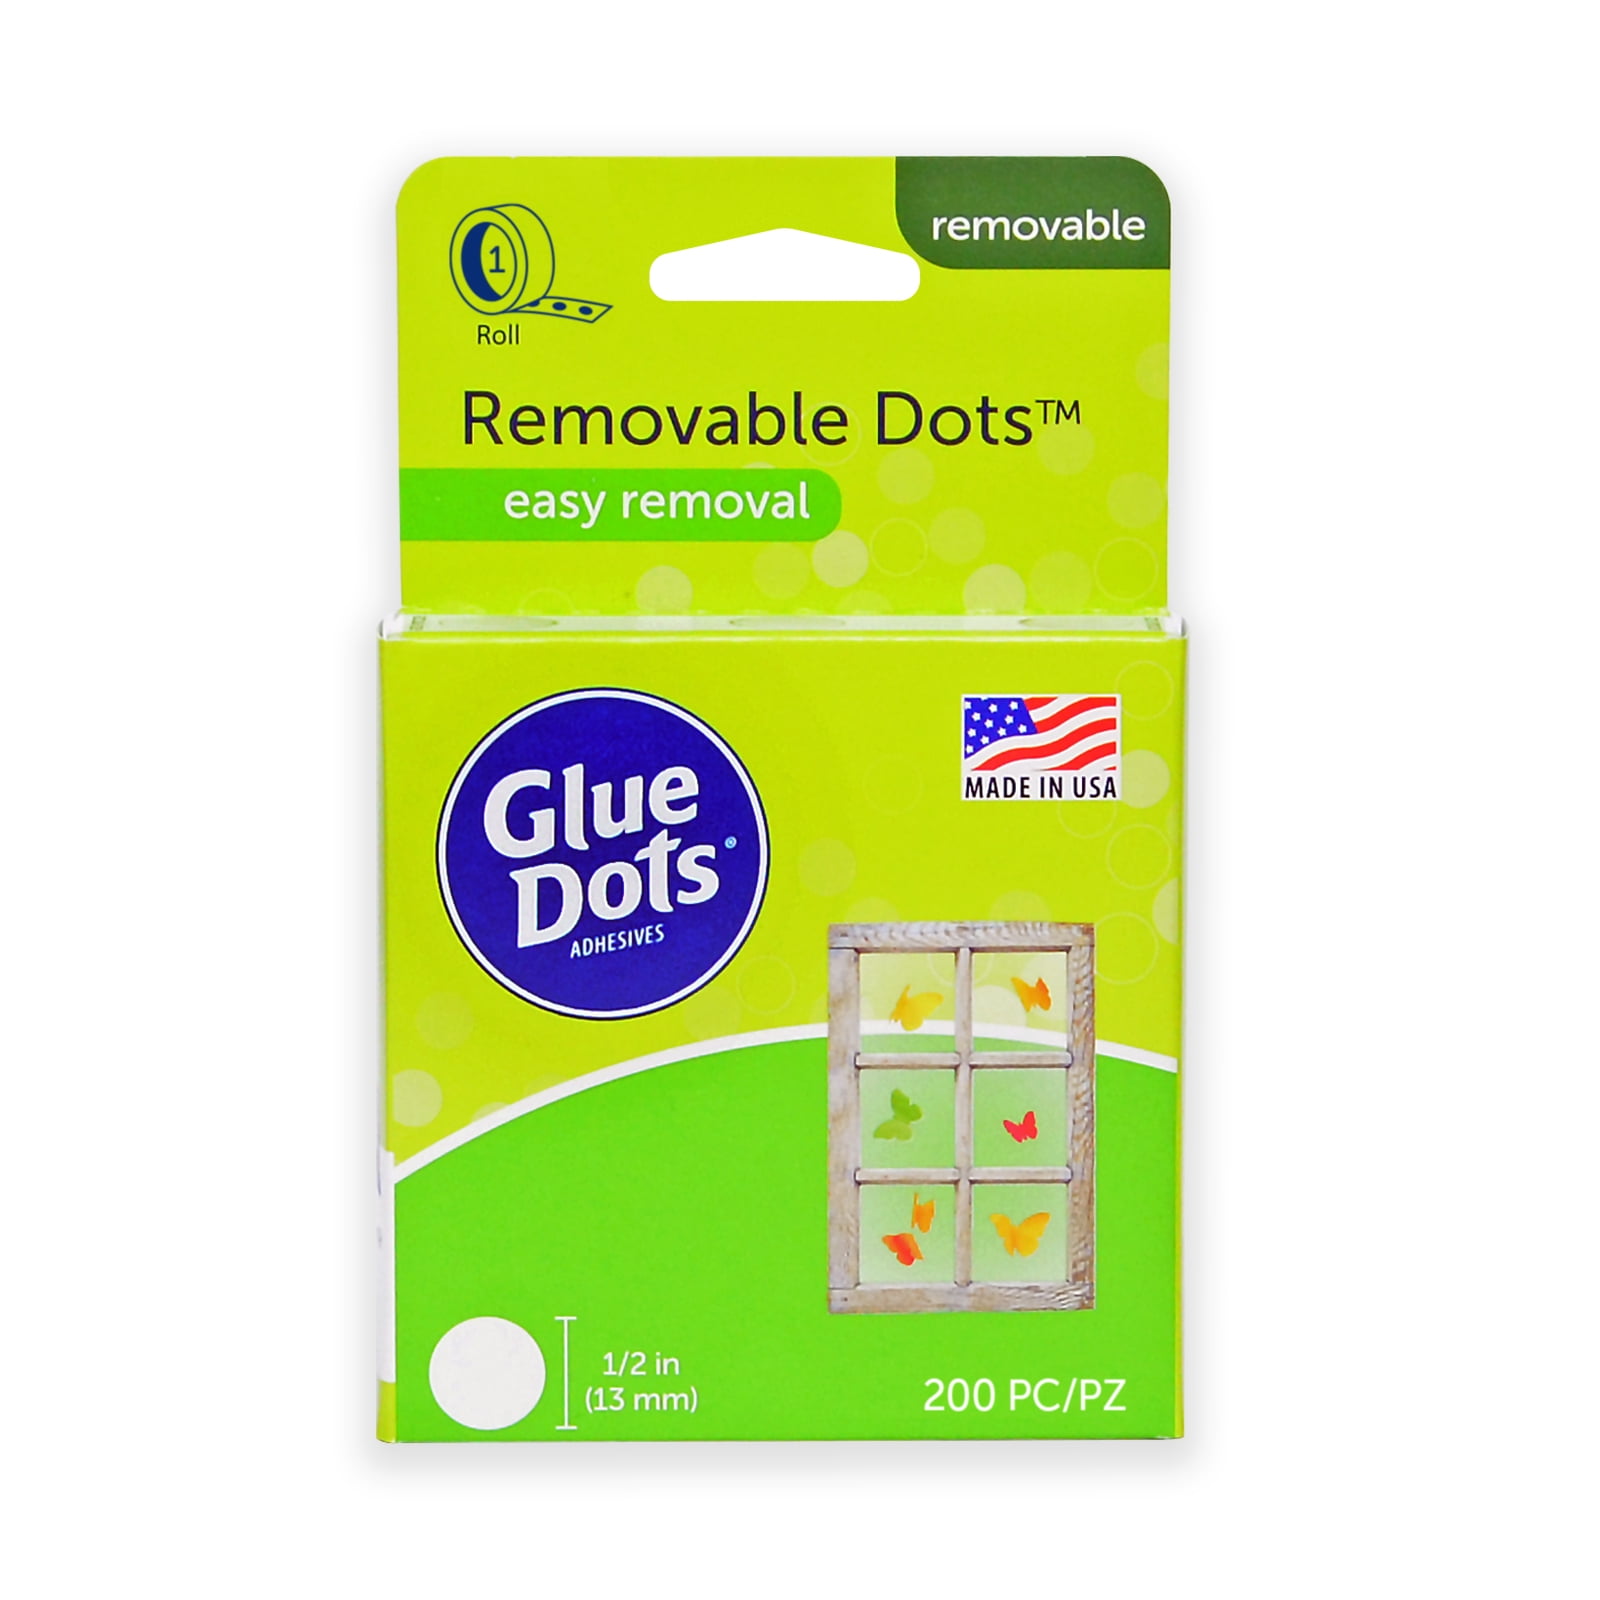  Bostik Glu Dots on a Roll - Removable, Double Sided Glue Dots,  for Instant Fixing & Crafts, Easy to Use, No Mess, Clear, x200 Glu Dots :  Tools & Home Improvement